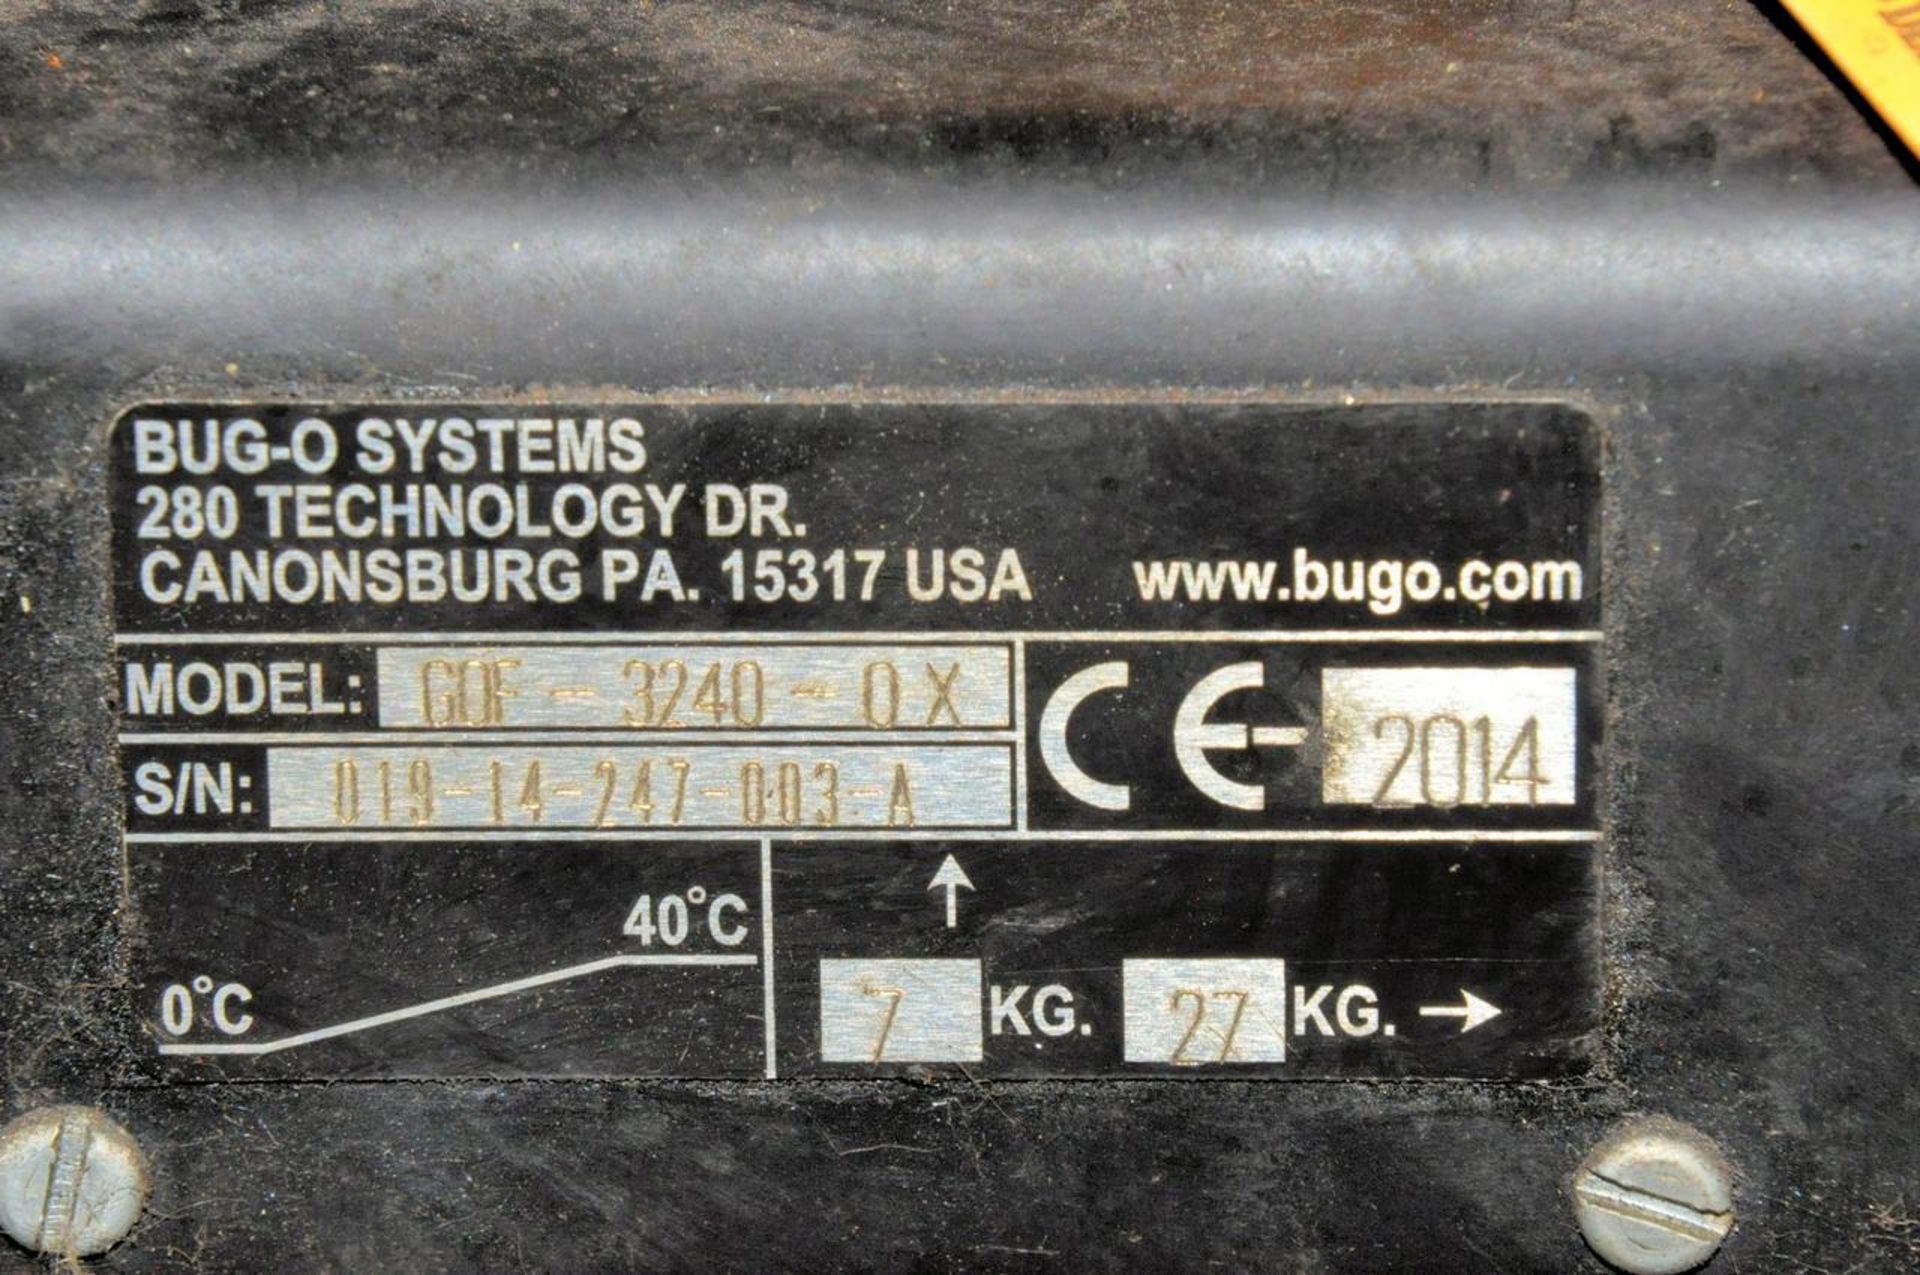 Bug-O Systems G0F-3240-0X Portable Track Burner with Track - Image 4 of 4